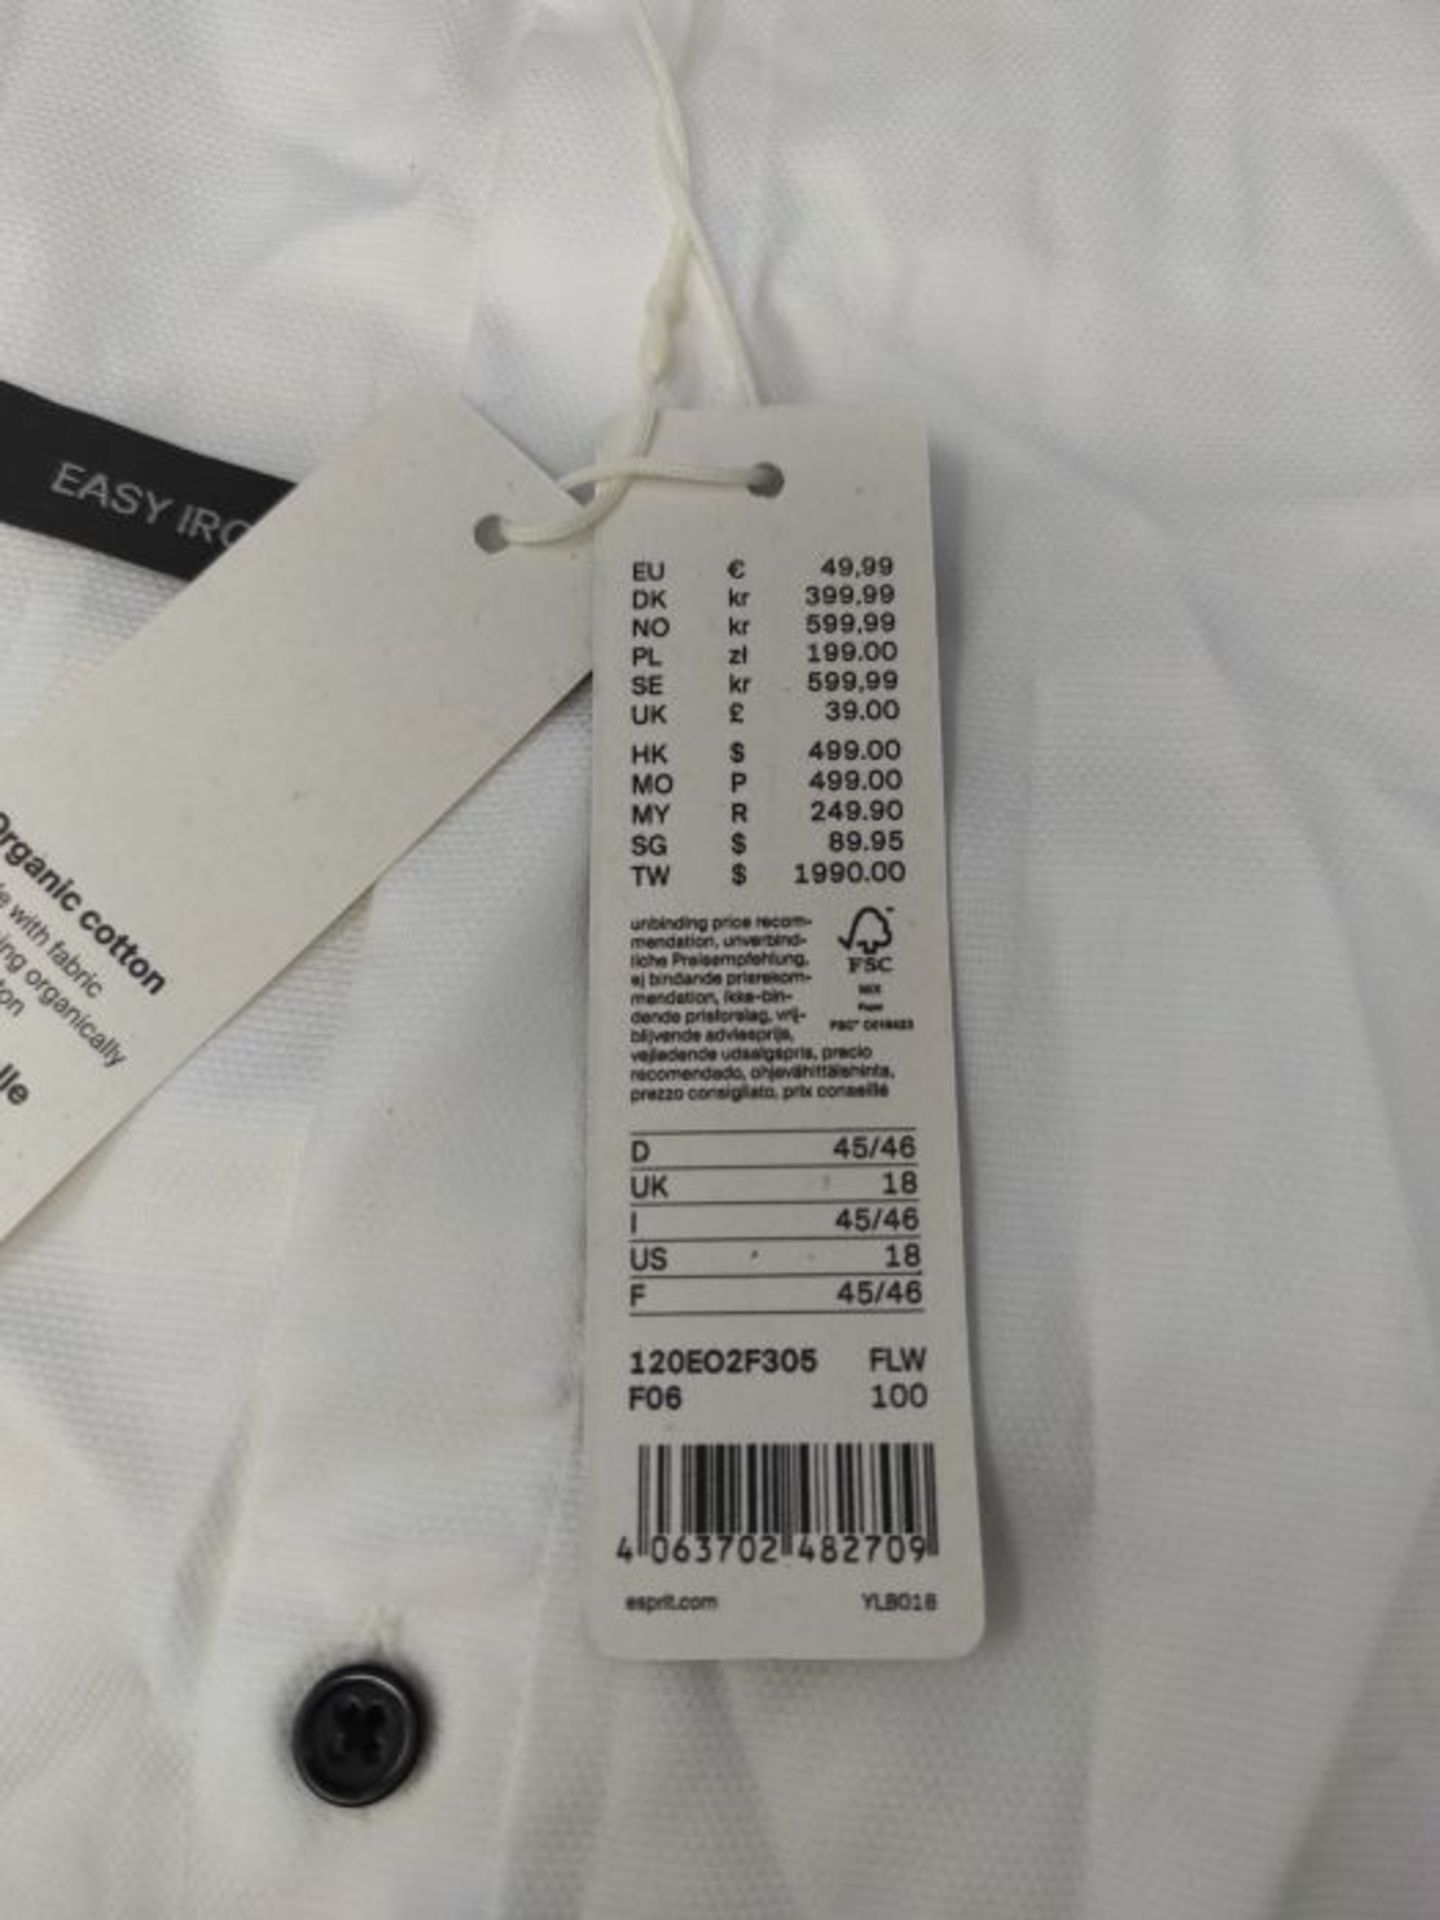 ESPRIT Collection Men's 120eo2f305 Shirt, 100/White, 36 - Image 3 of 3